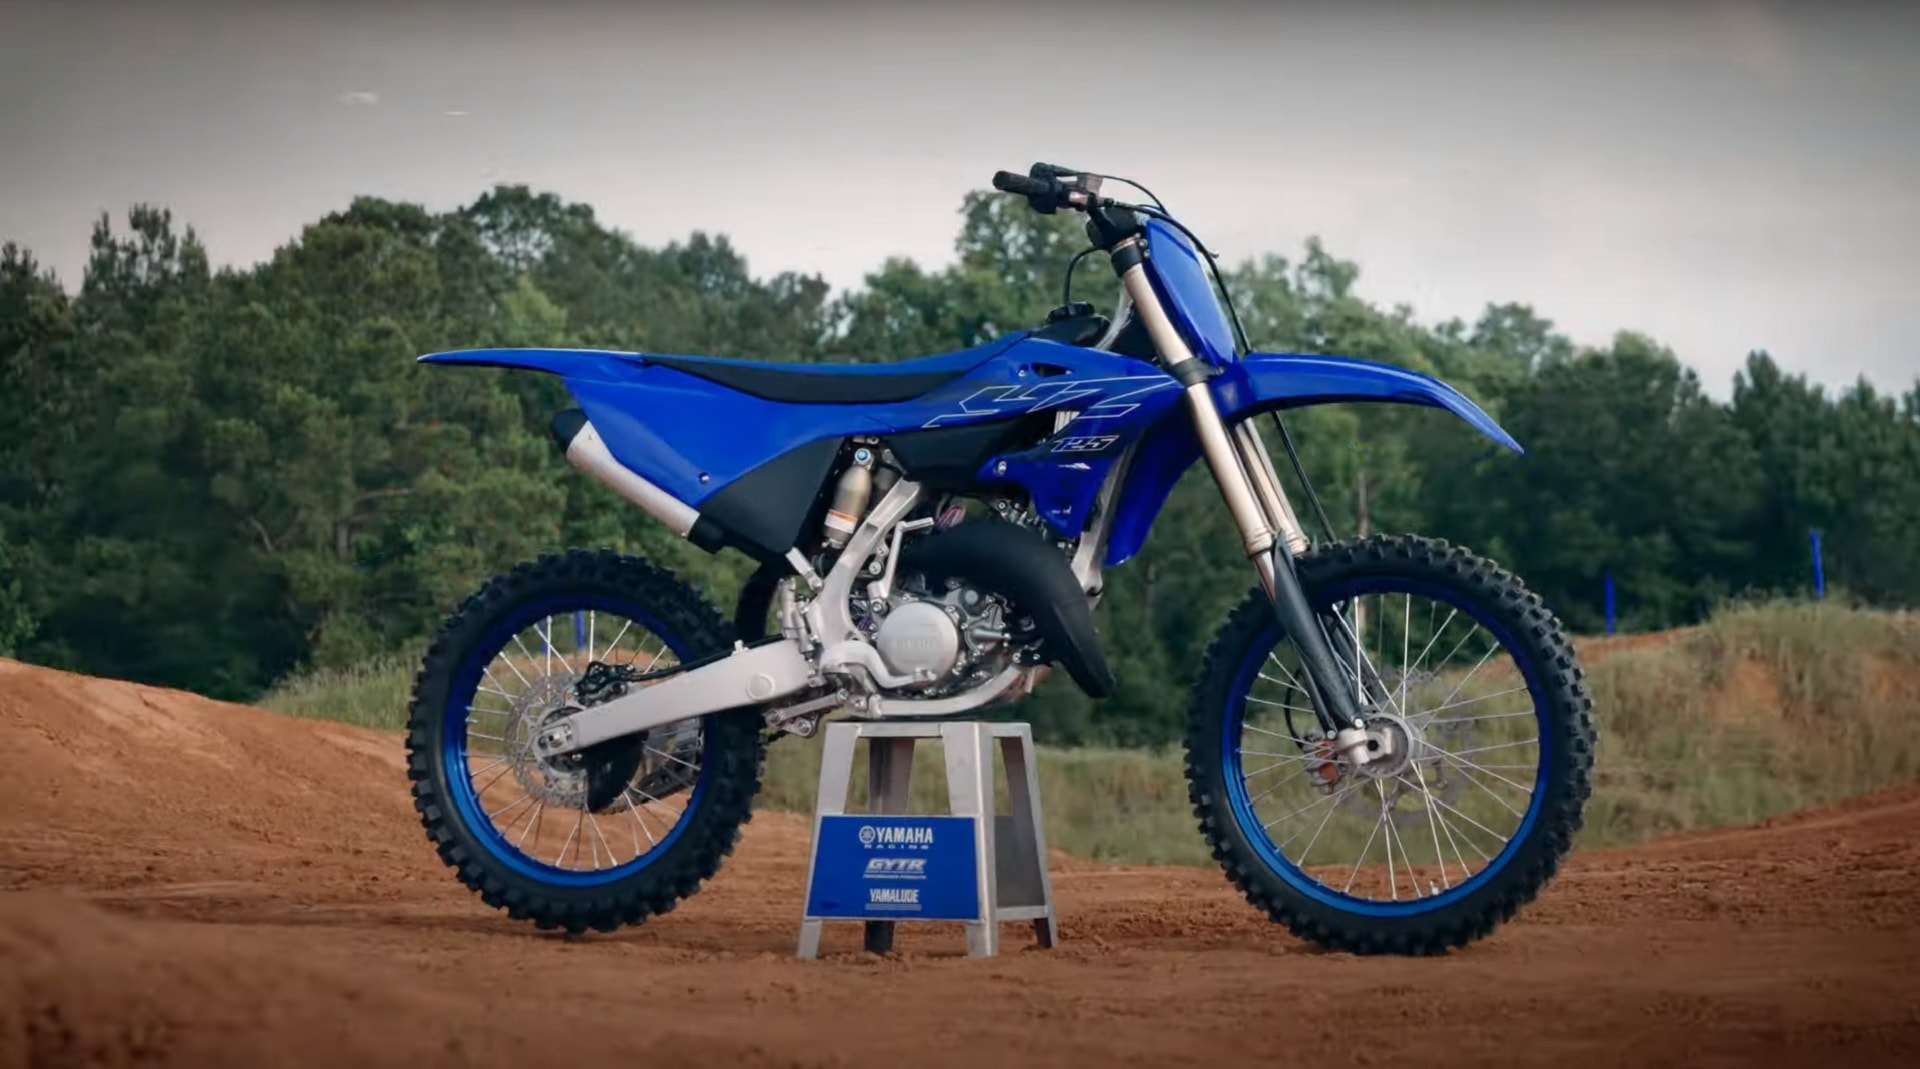 Yamaha Updates Its Iconic YZ125 for the First Time in 15 Years